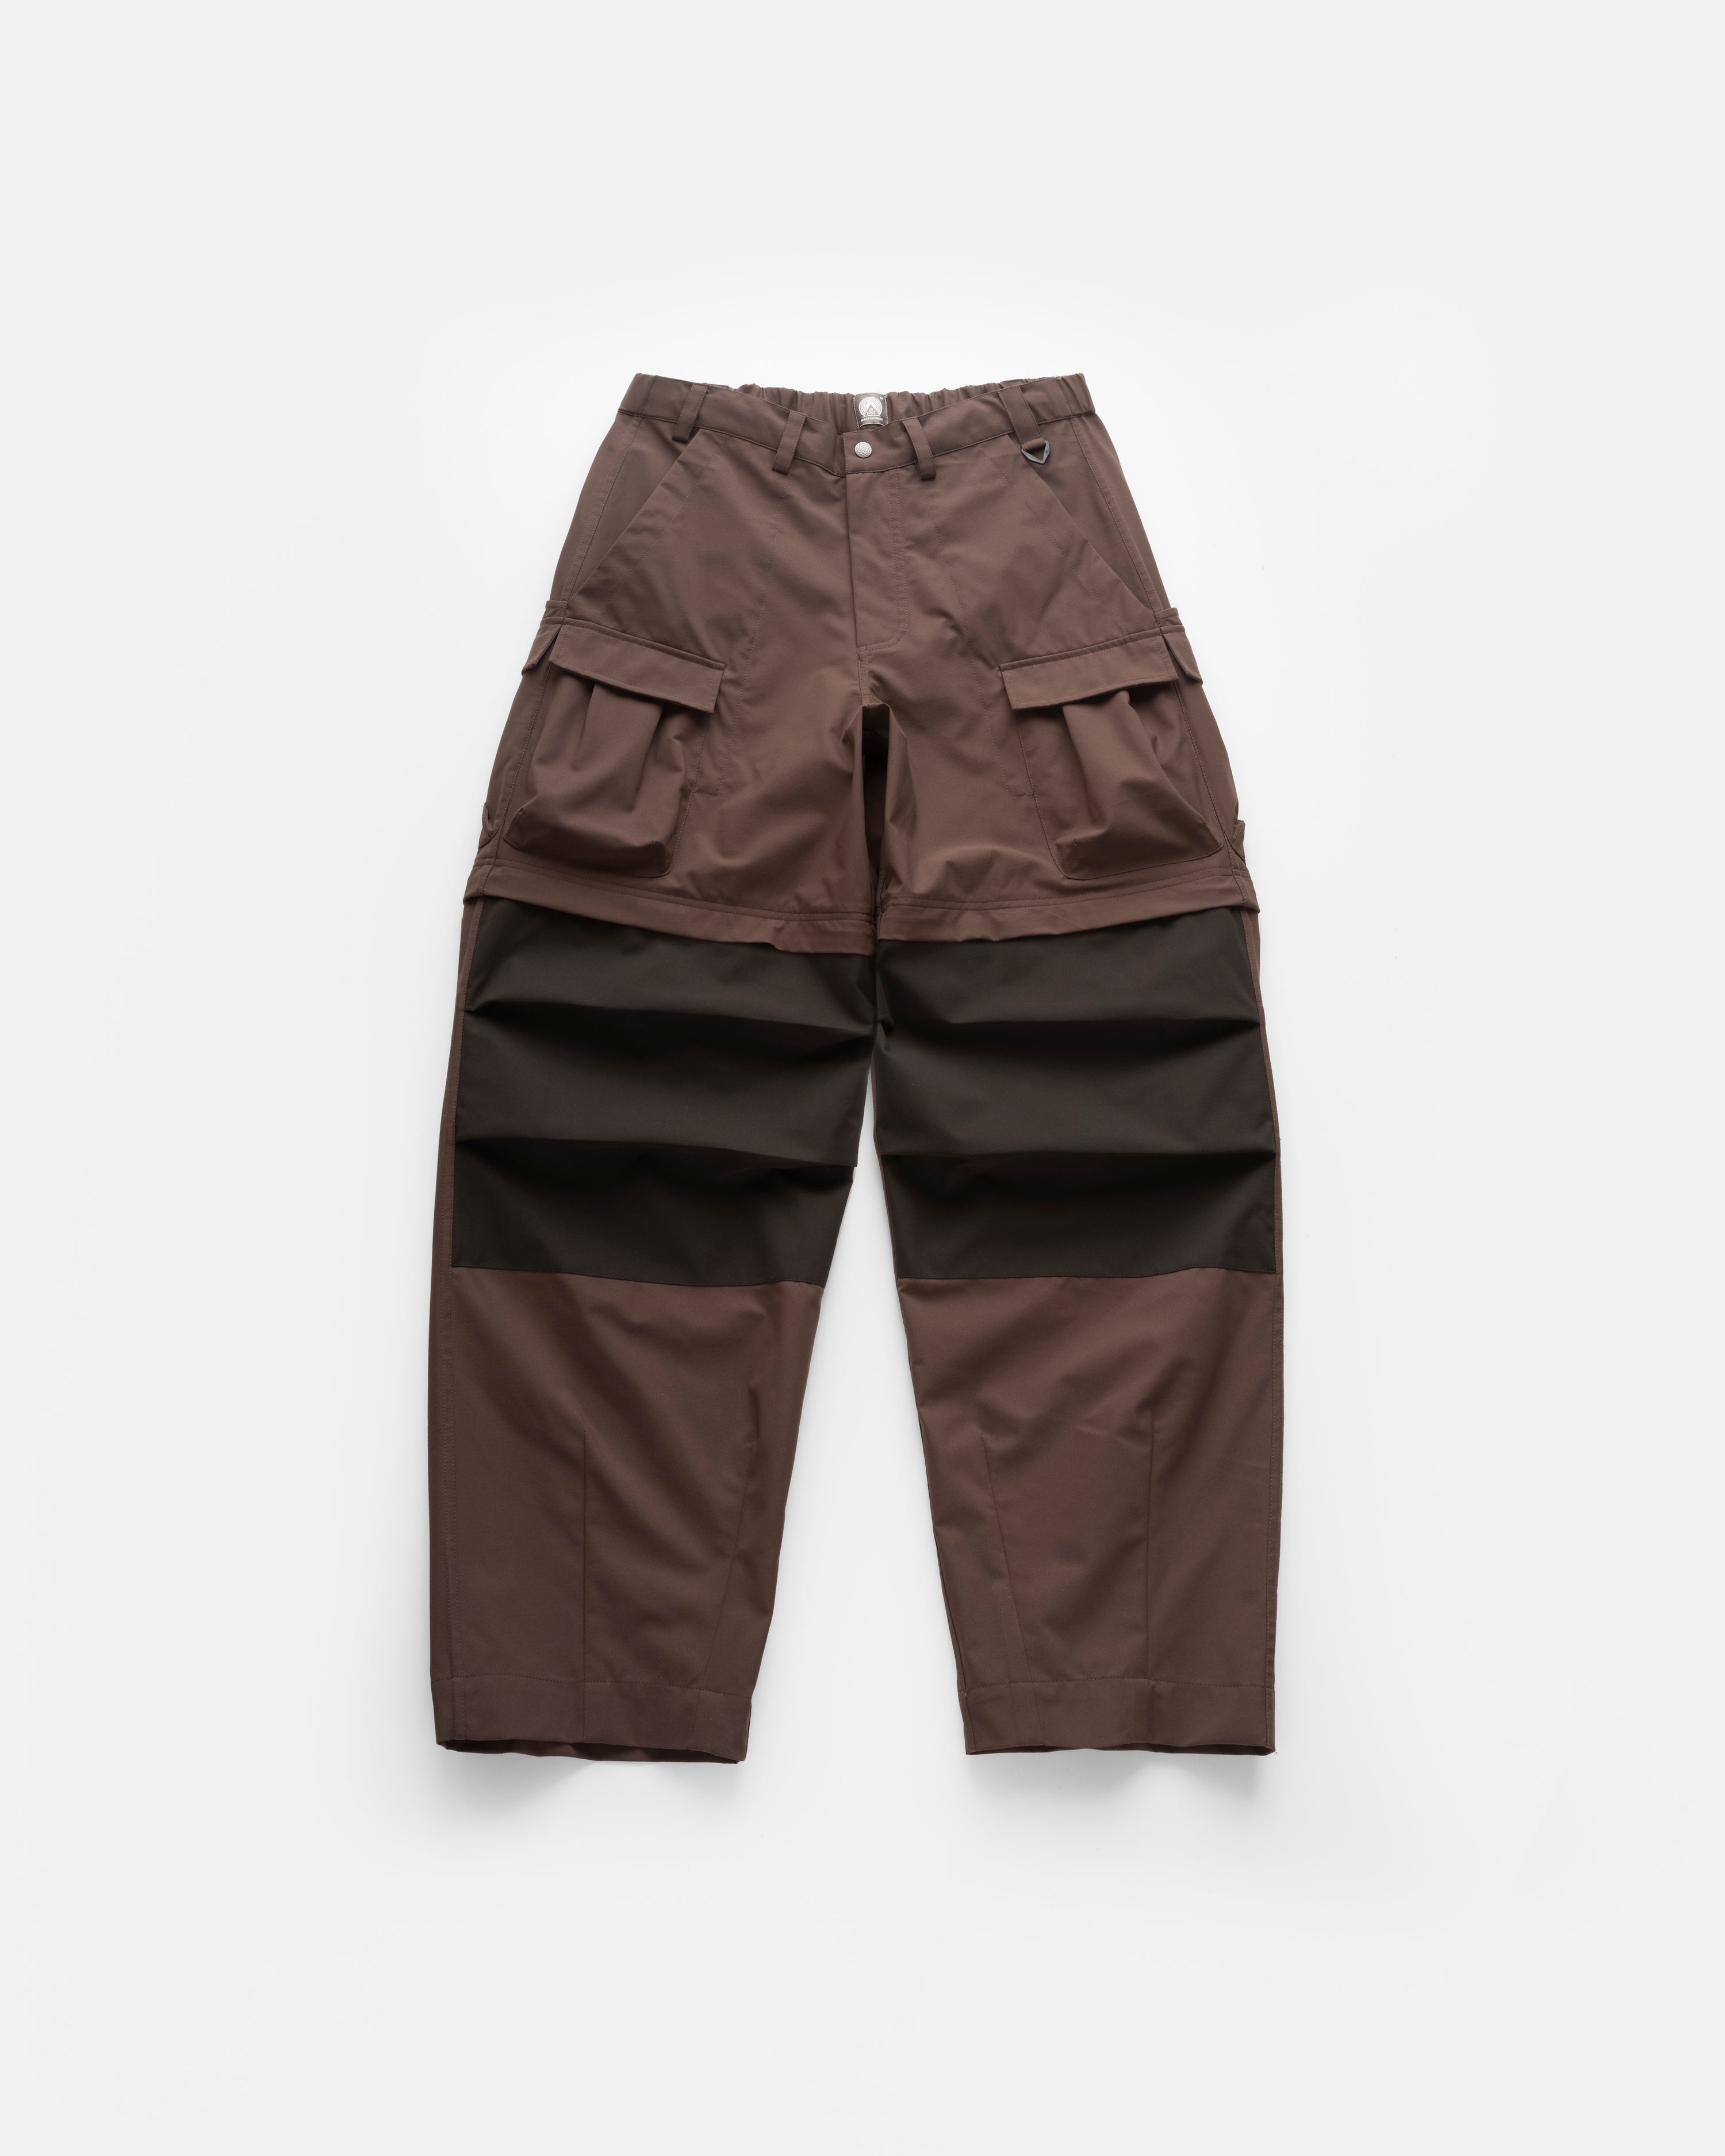 CASCADE OUTDOOR PROTECTION SYSTEM CONVERTIBLE CARGO PANT - BROWN / WASHED BLACK WATER-REPELLENT BONDED MEMBRANE